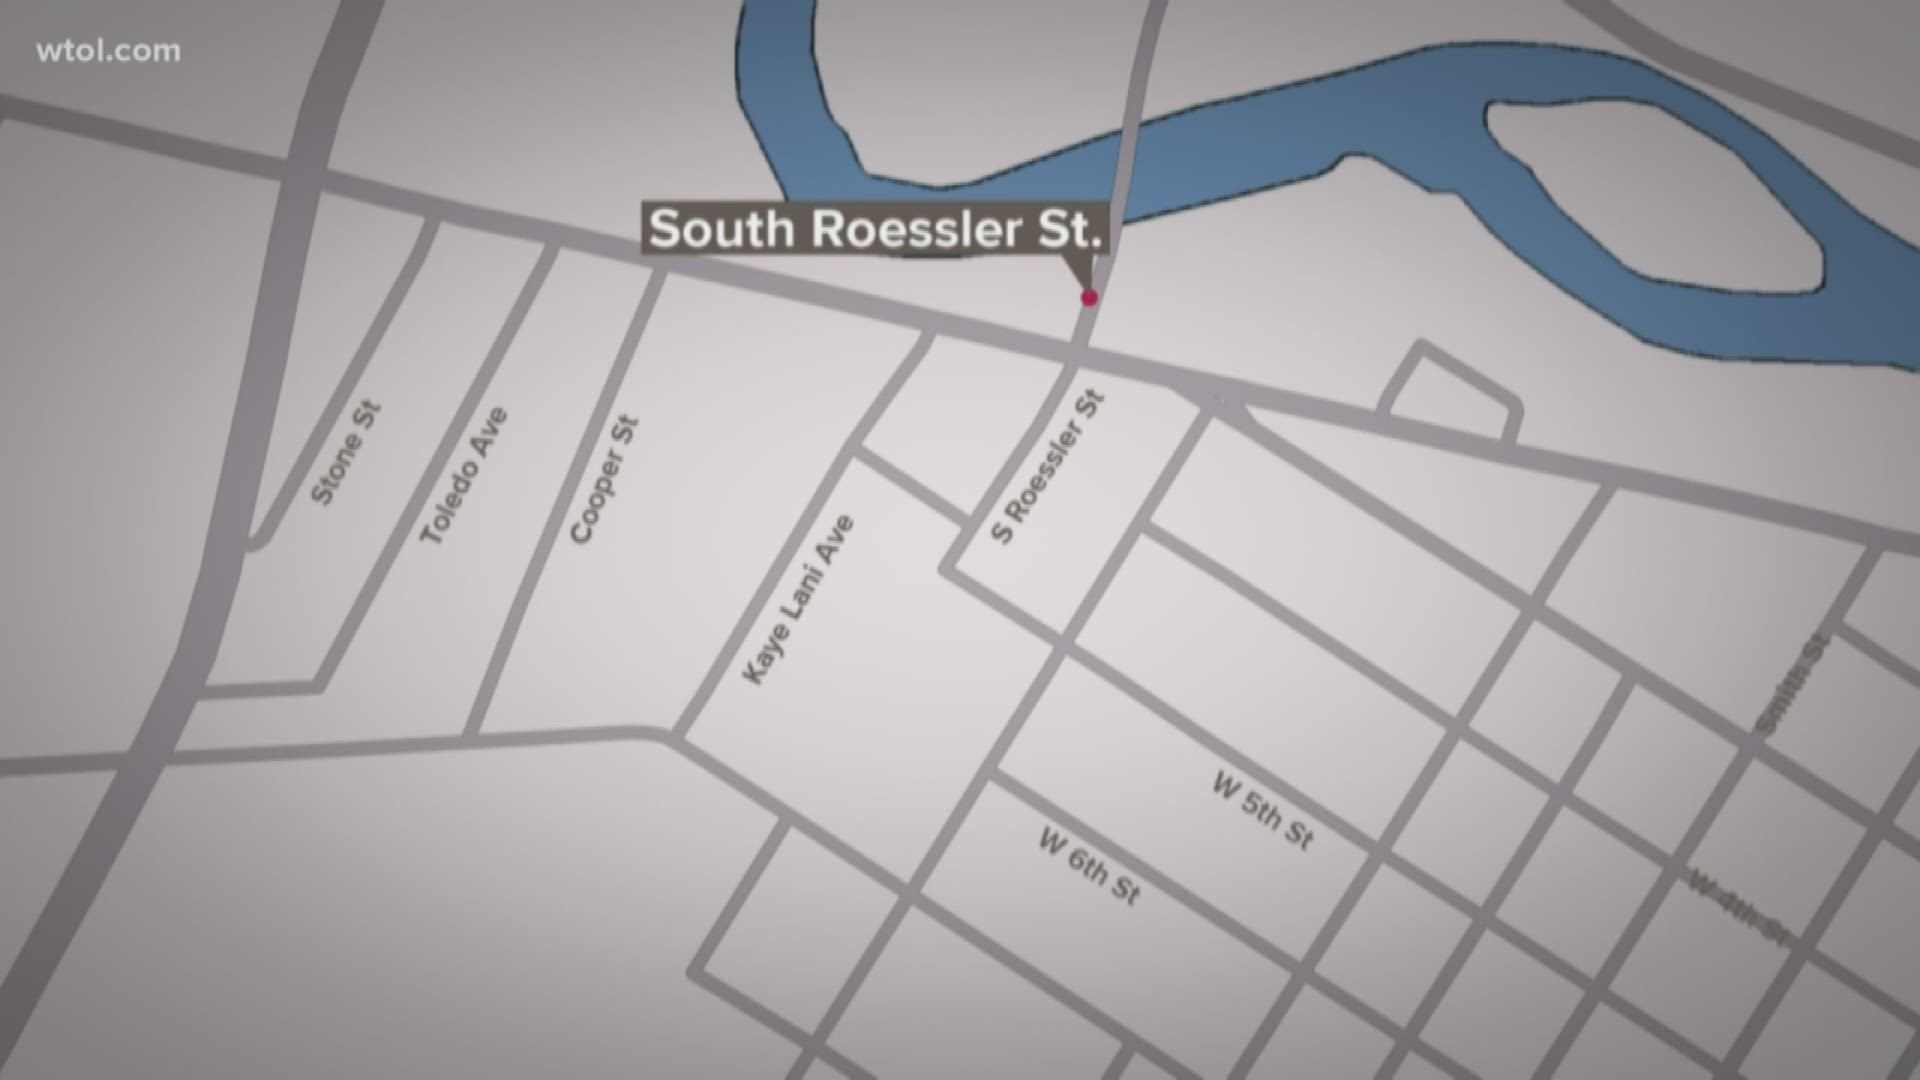 At least one intruder tried to force their way into an apartment on South Roessier and opened fire on two men inside Saturday night.